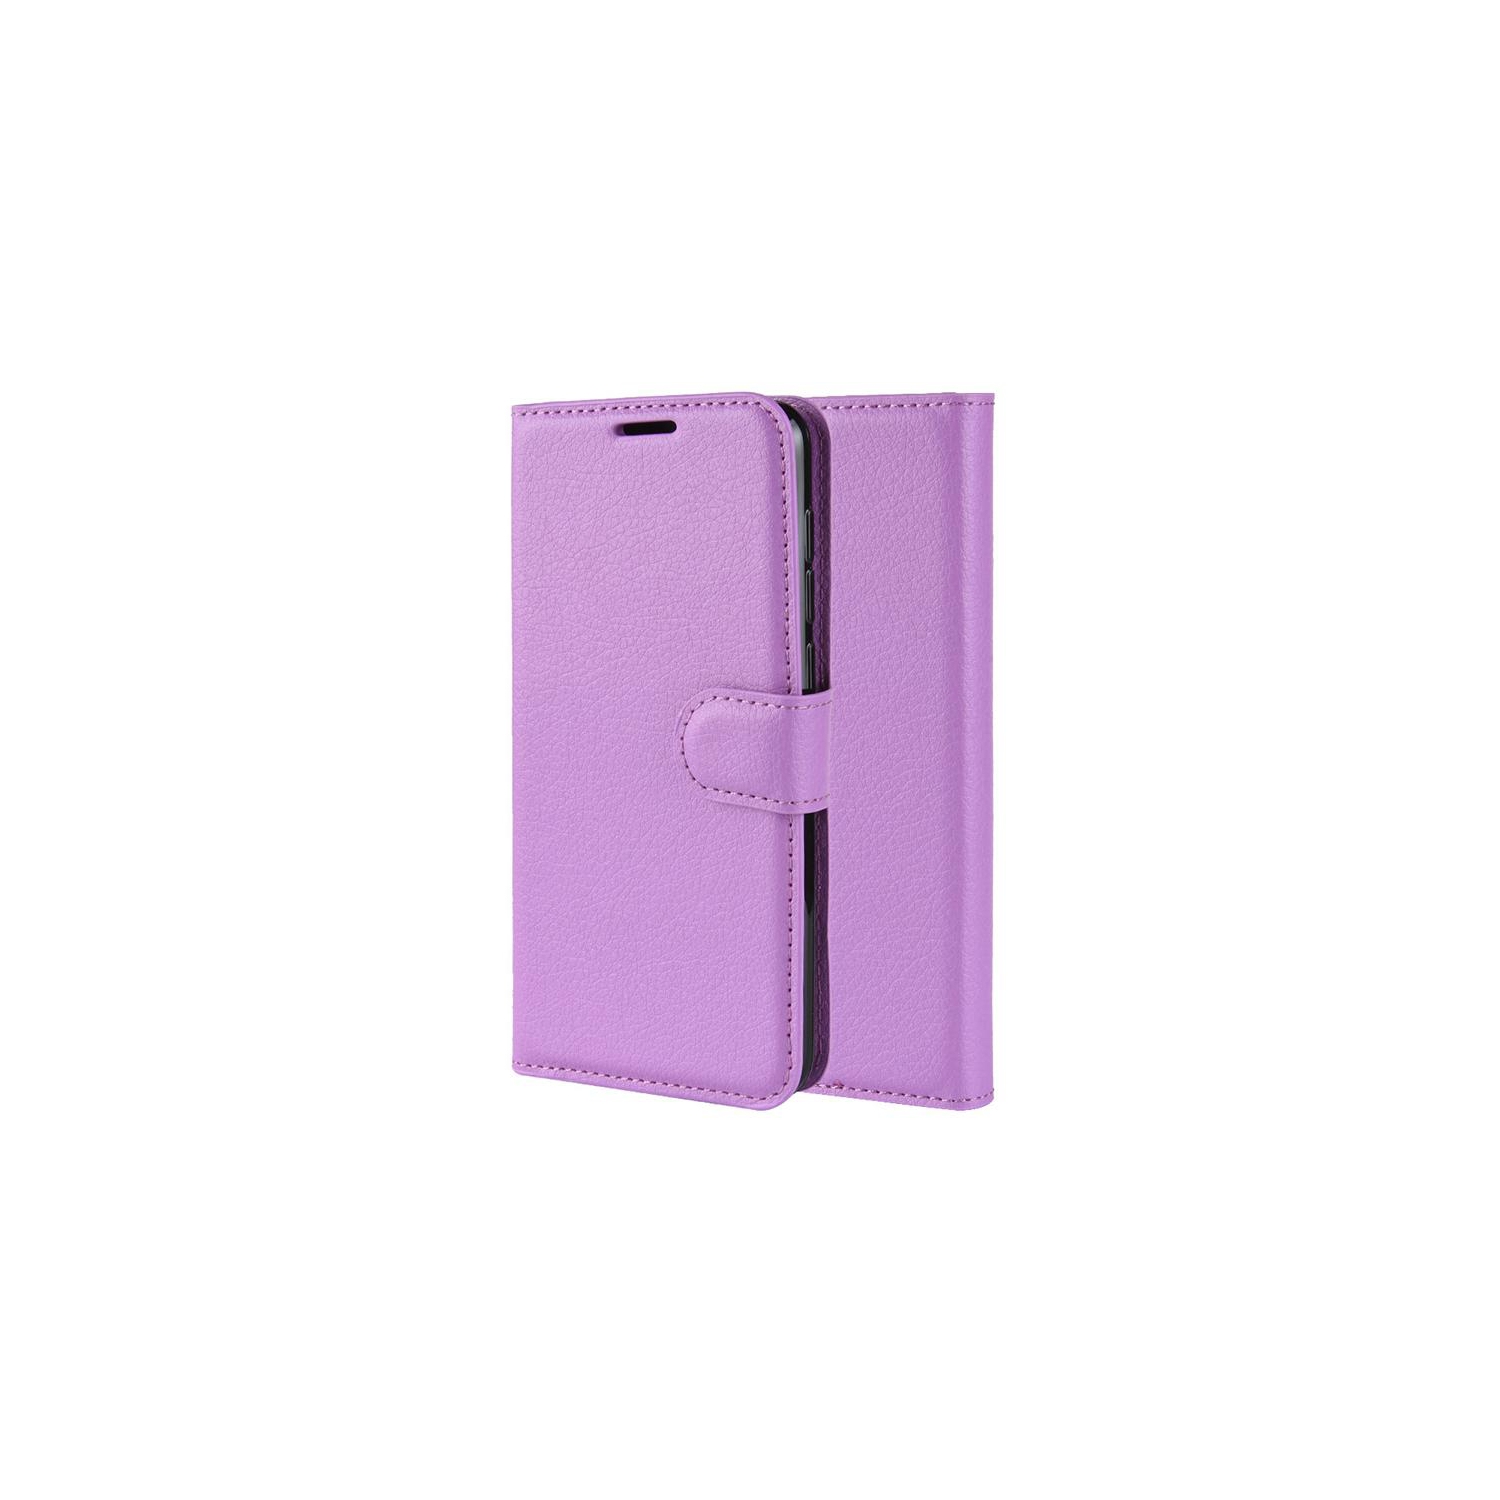 PANDACO Purple Leather Wallet Case for Samsung Galaxy S10e